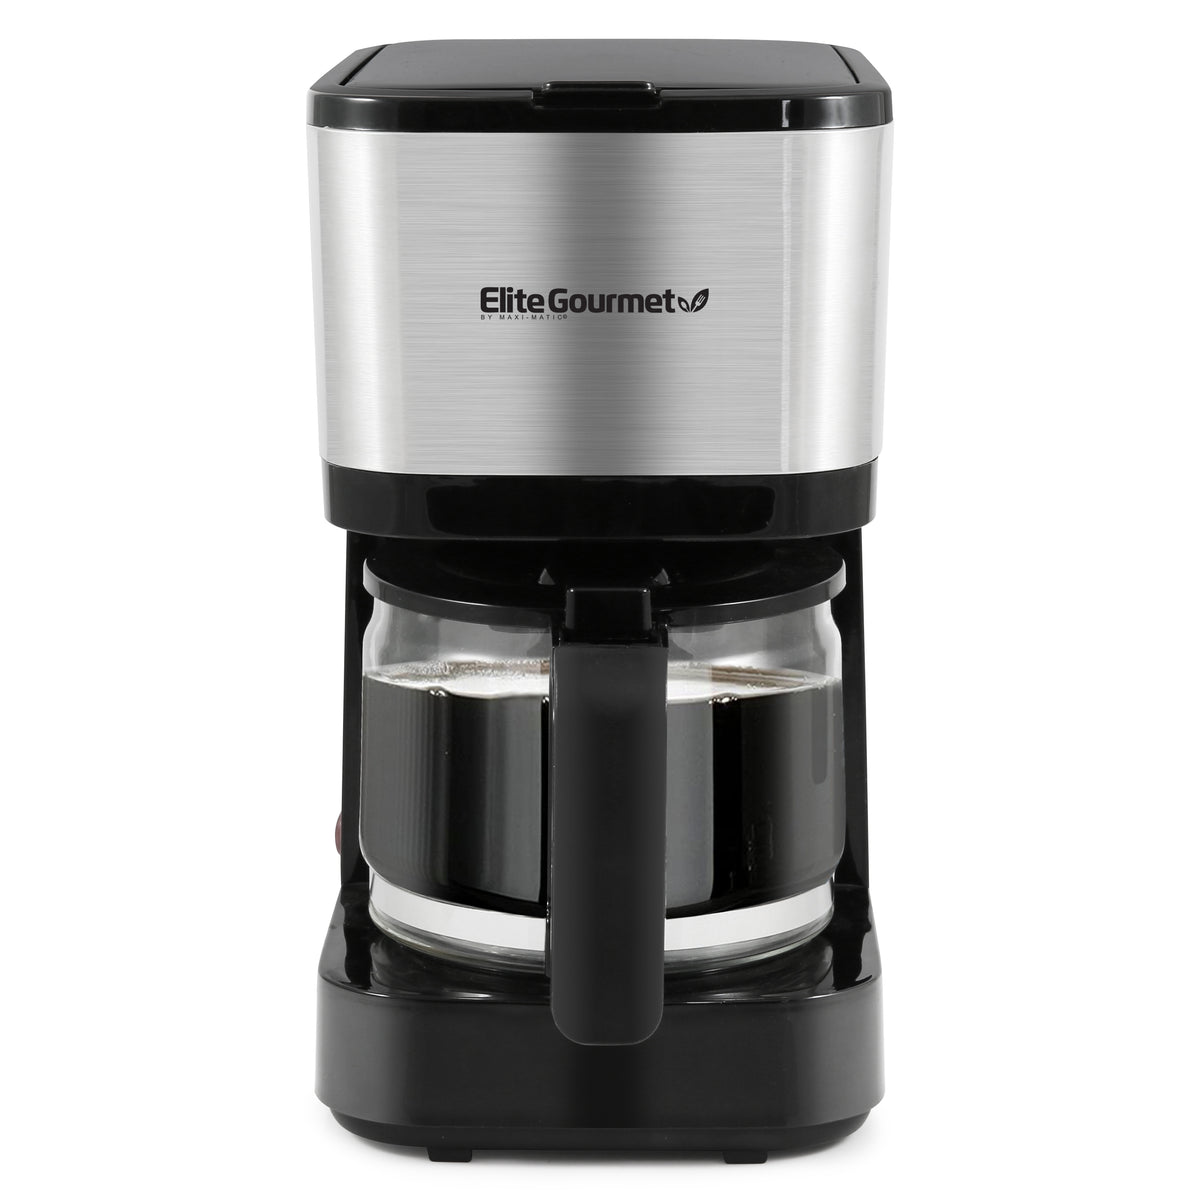 Layaway Elite Gourmet - 5-cup Coffee Maker with pause and serve